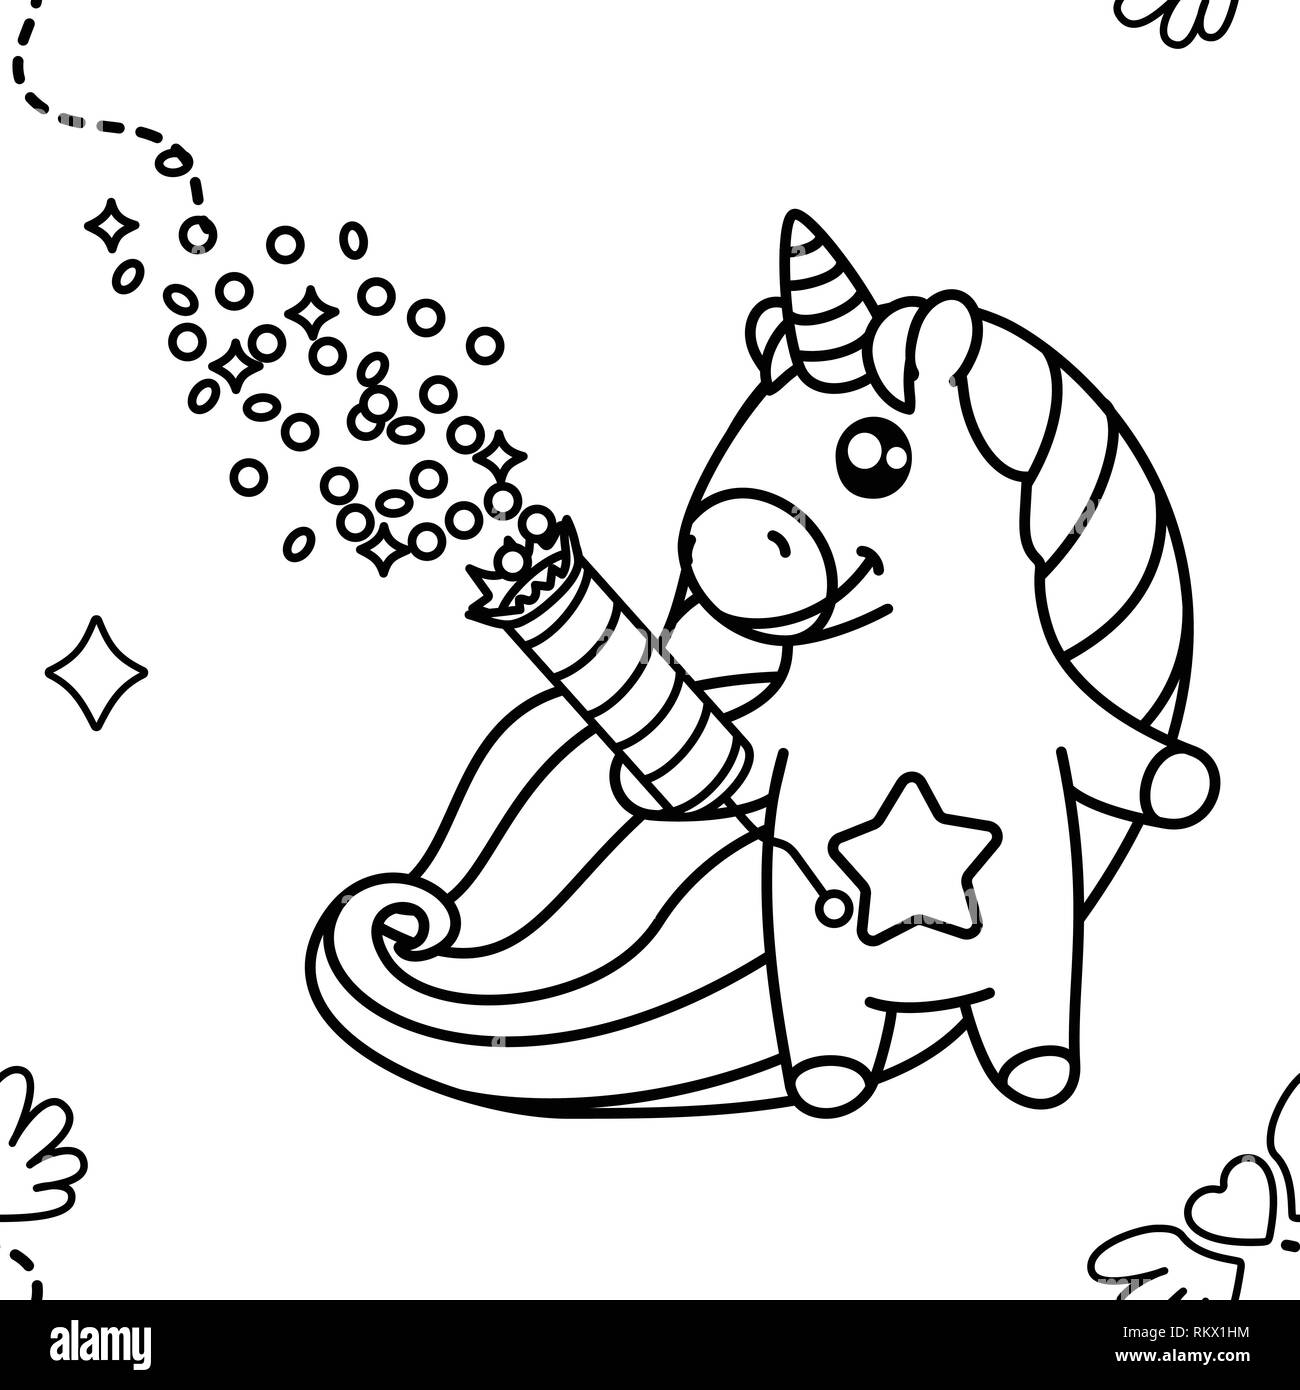 vector rainbow unicorn pattern coloring book page Stock Vector Image ...